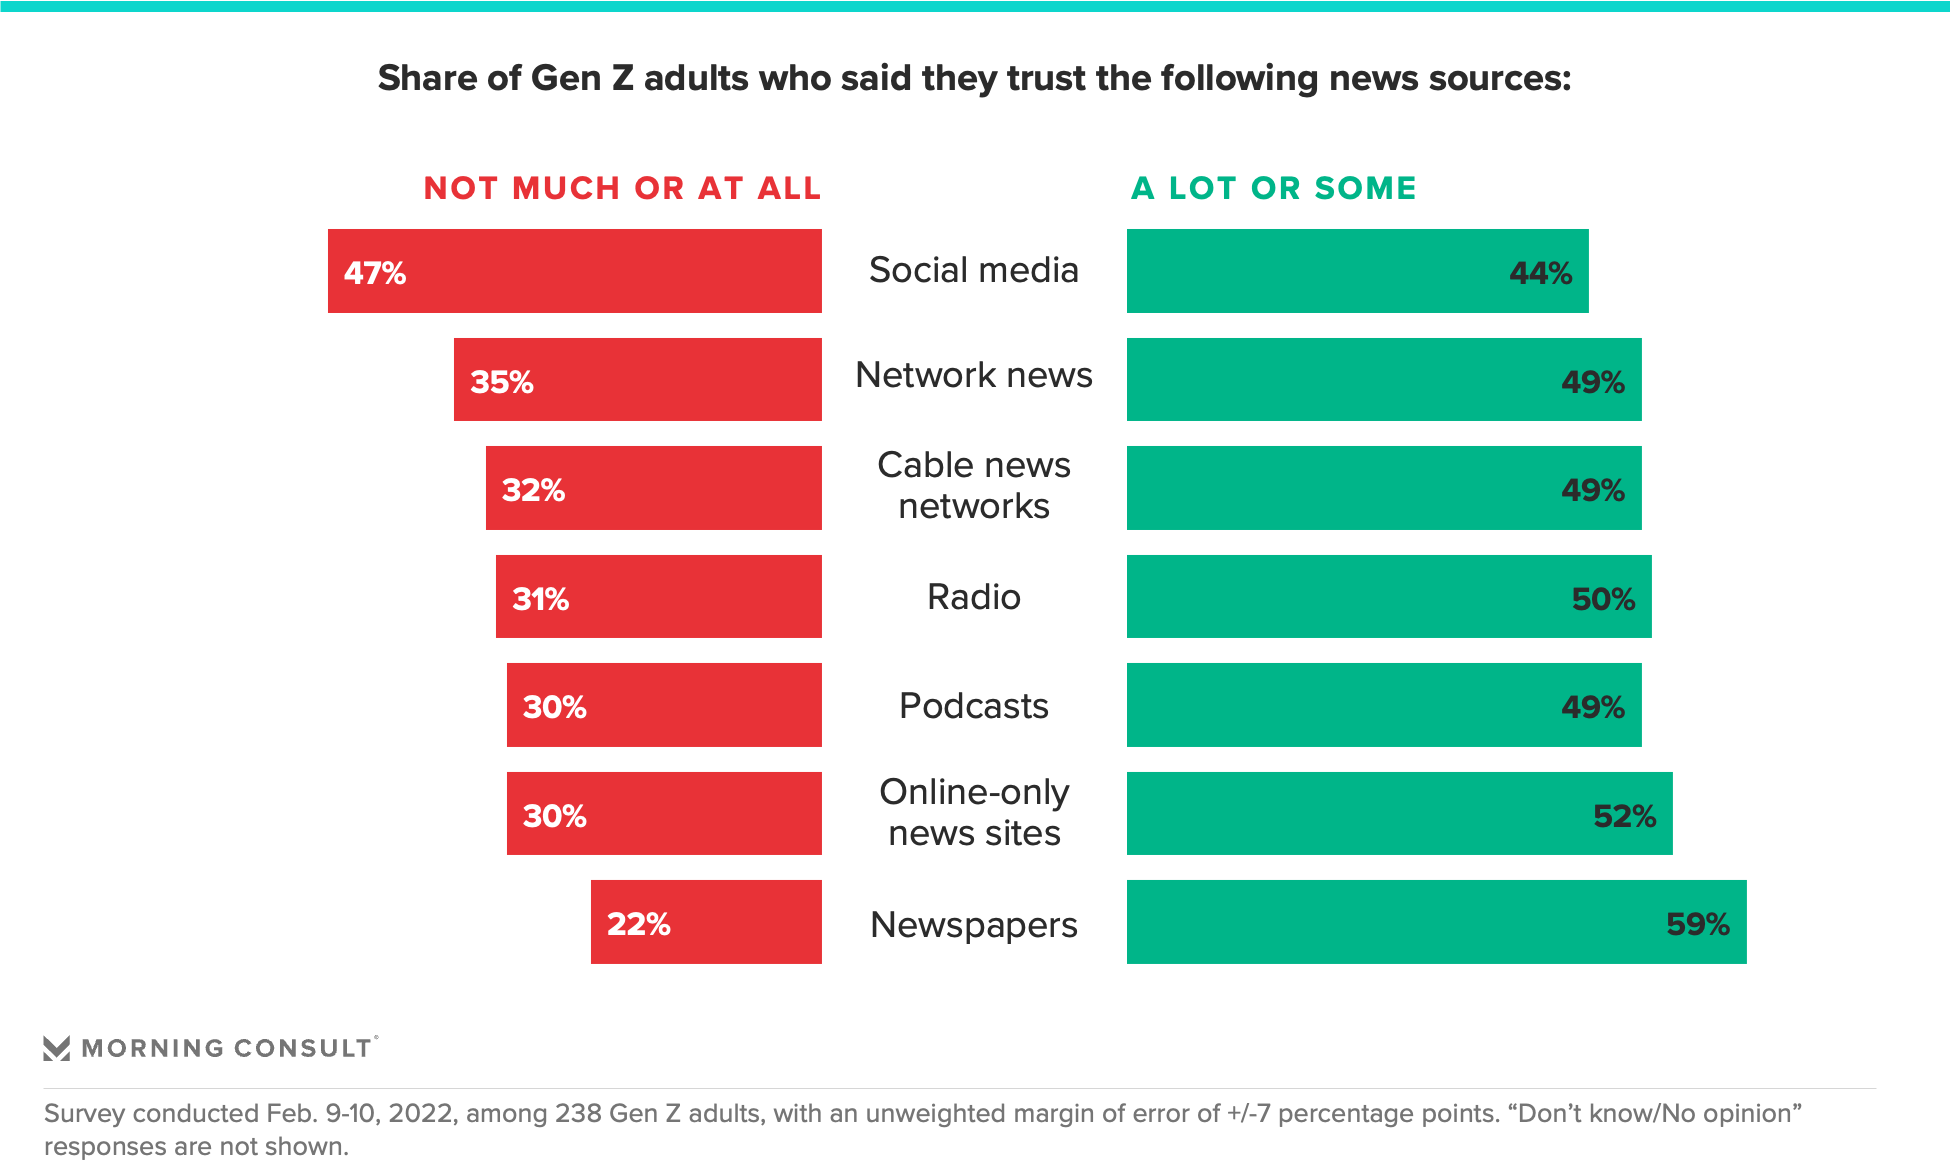 Butterfly chart showing the share of Gen Z adults who trust various news sources including social media